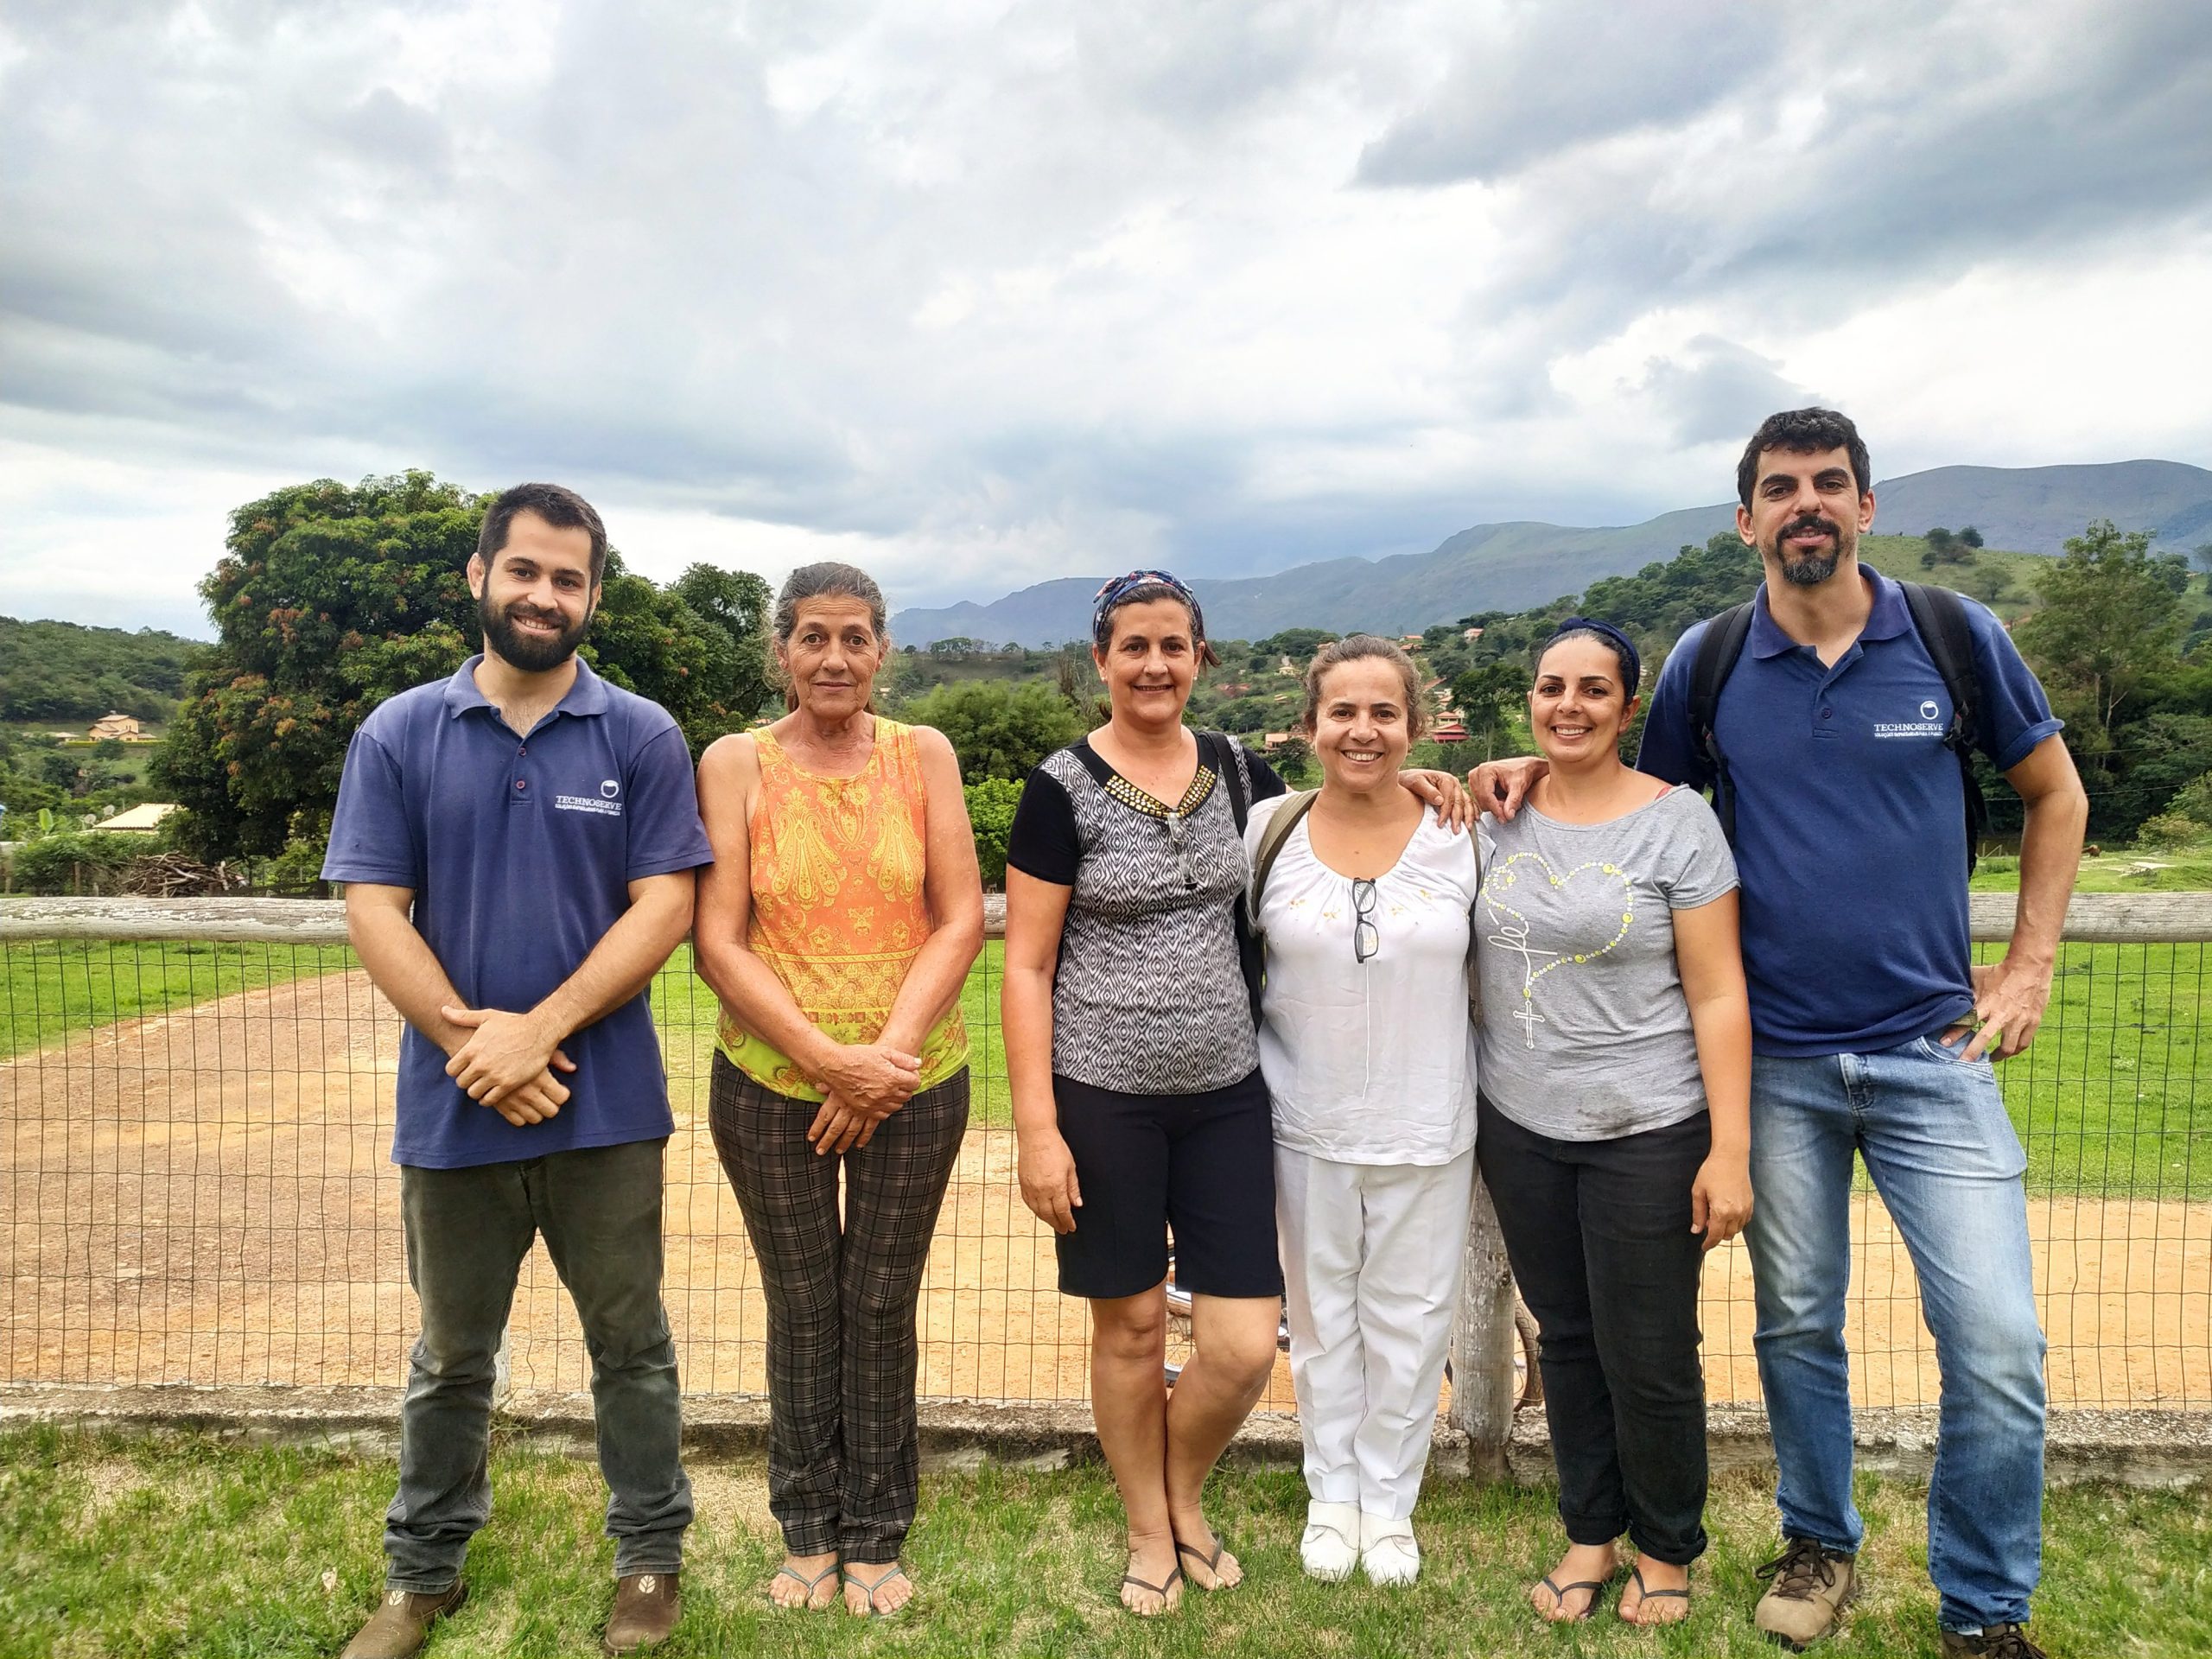 The women who started Talento do Campo stand with two TechnoServe advisors.